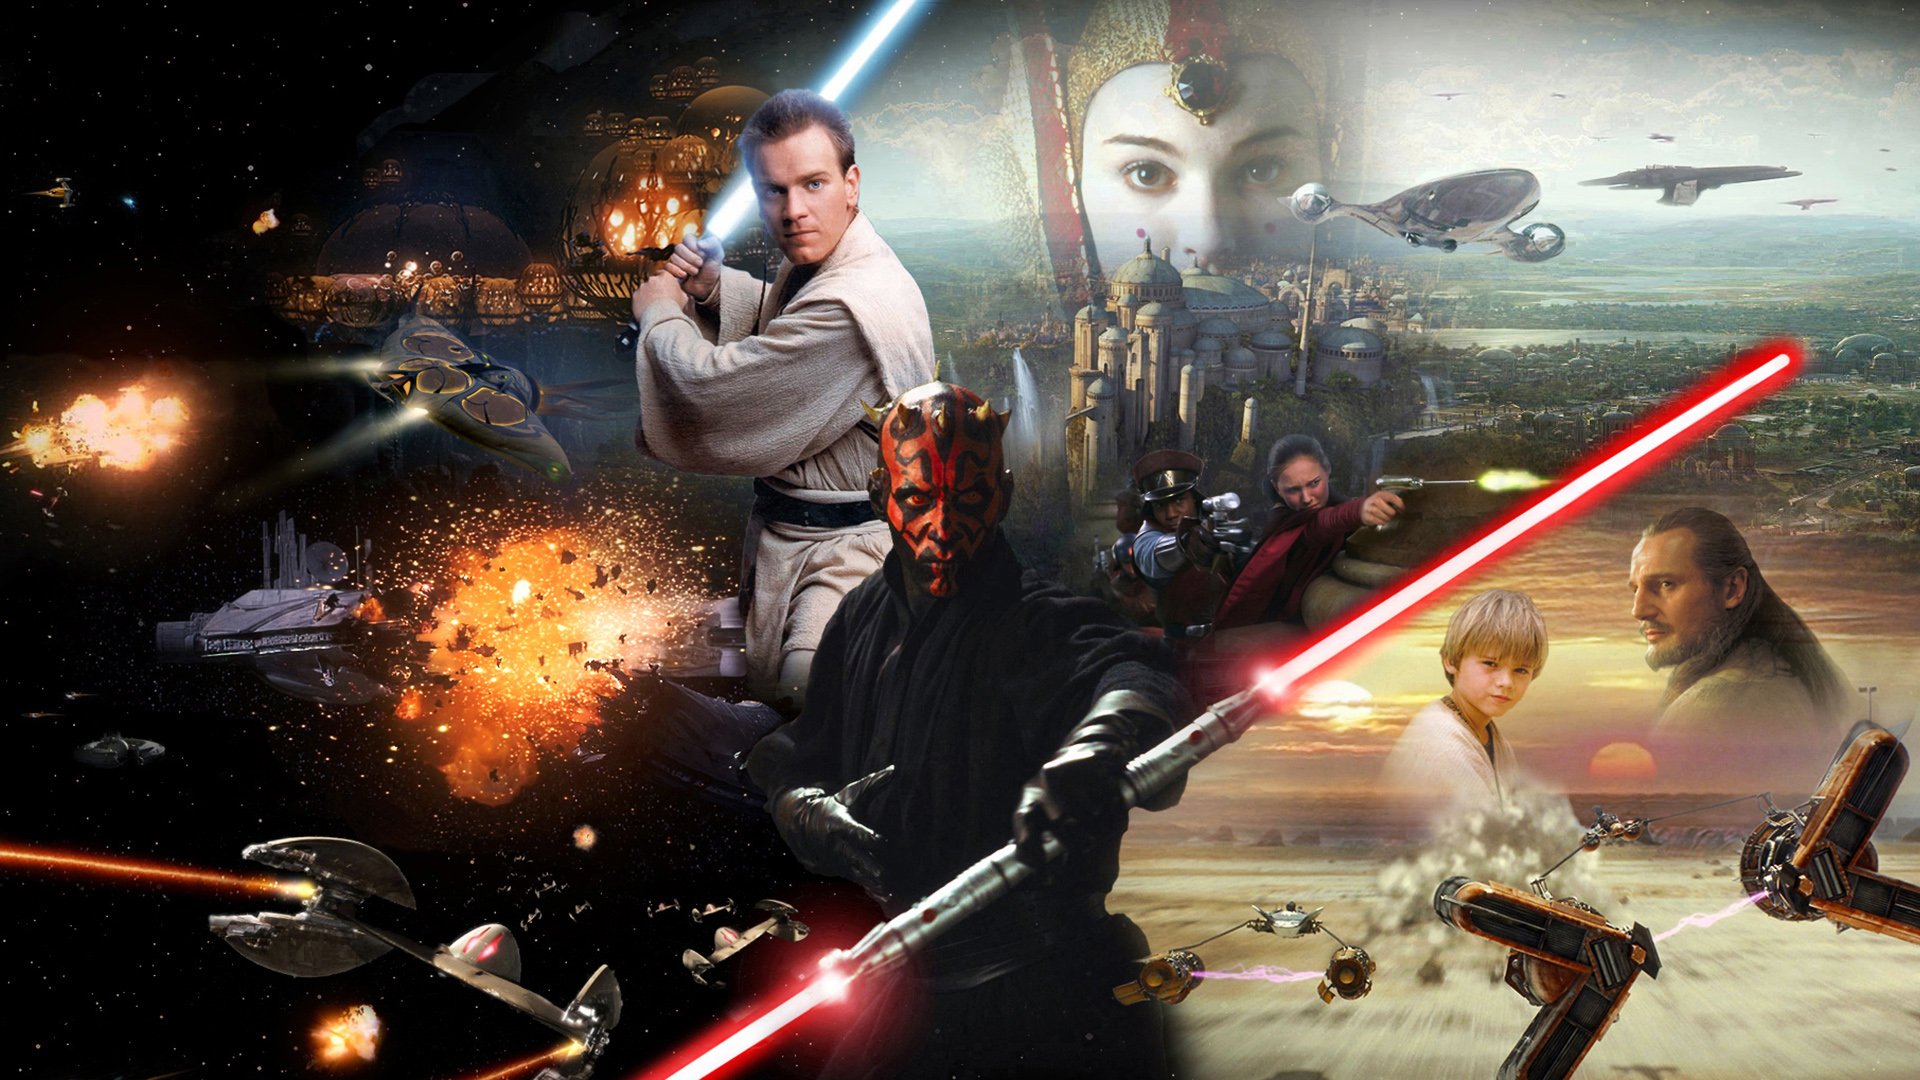 Star Wars Ep. I: The Phantom Menace for iphone download